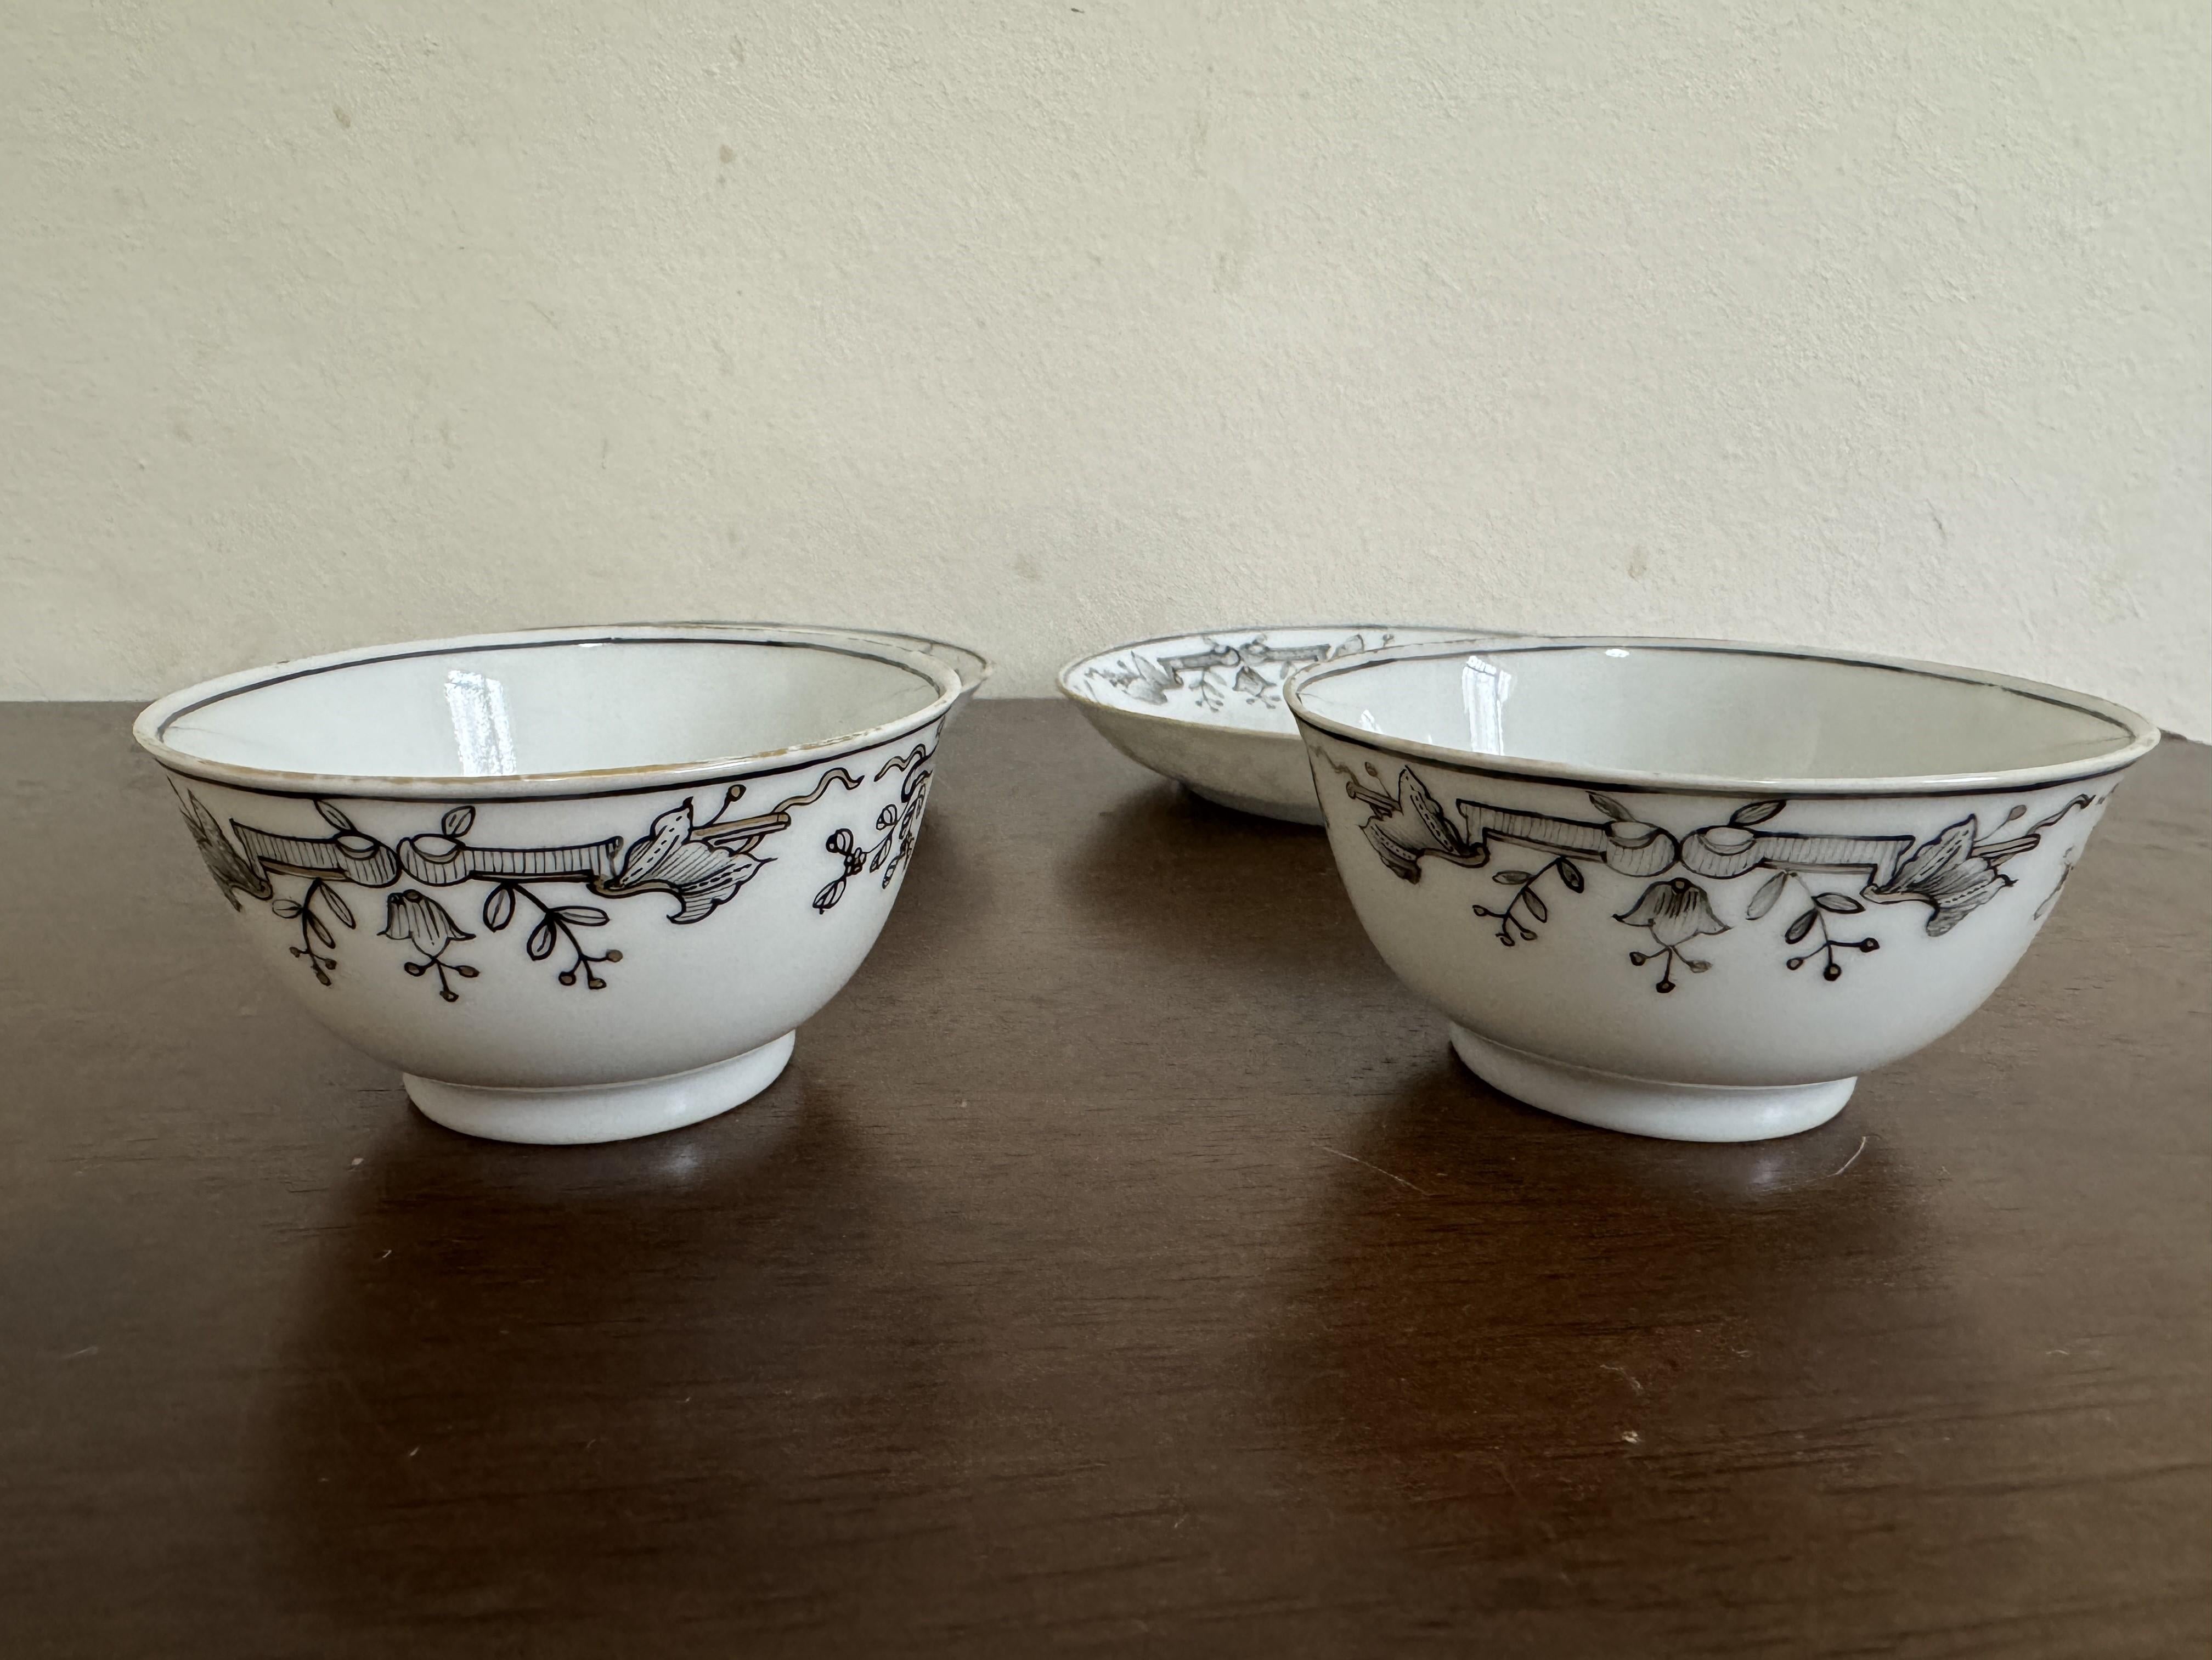 Porcelain Set of Chinese export 'mythological' cups and saucers, 18th Century Qianlong